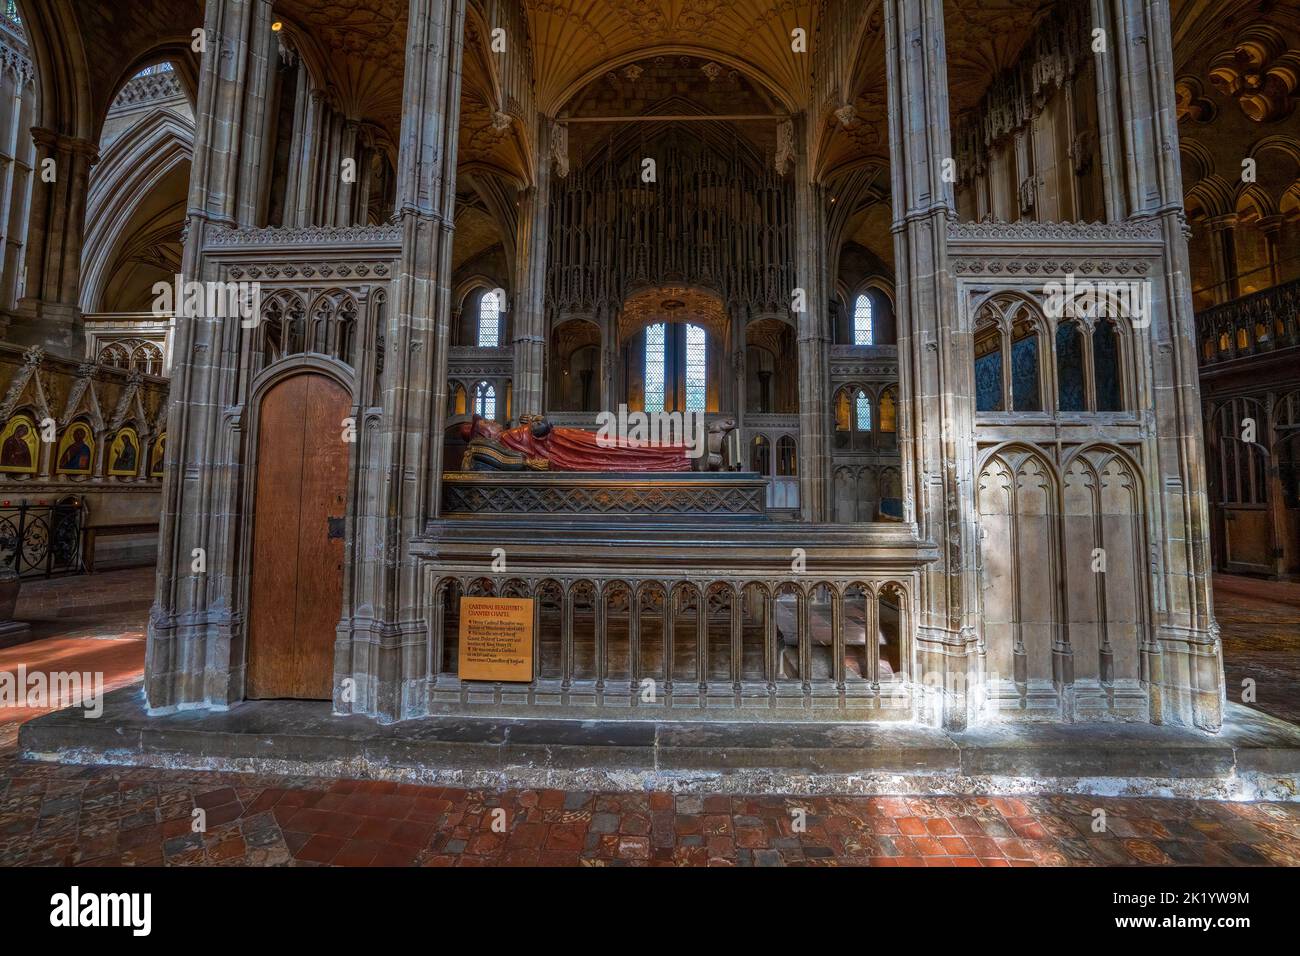 The tomb of  Cardinal Beaufortat 1477 at Winchester Cathedral, Winchester,Hampshire,England, Uk Stock Photo